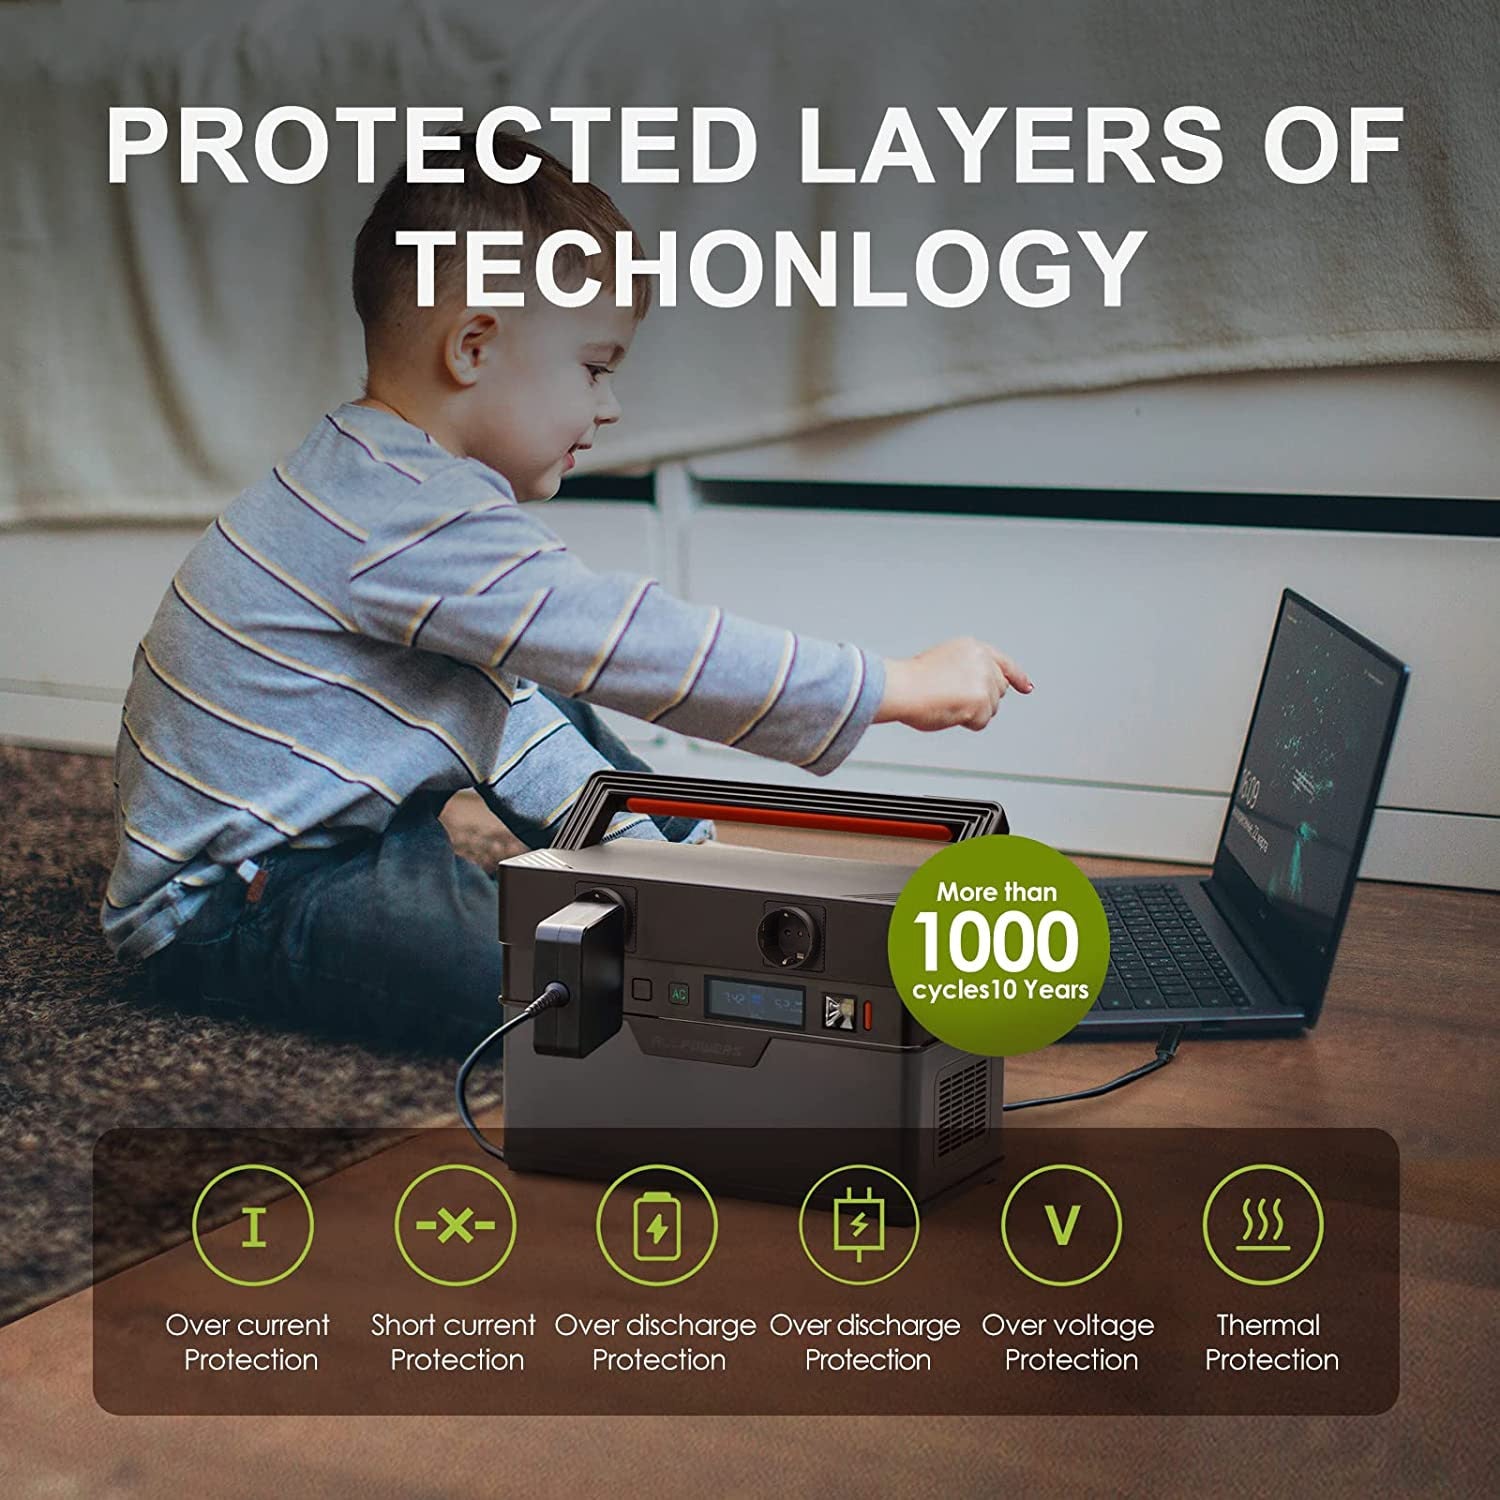 PROTECTED LAYERS OF TECHNOLOGY More than